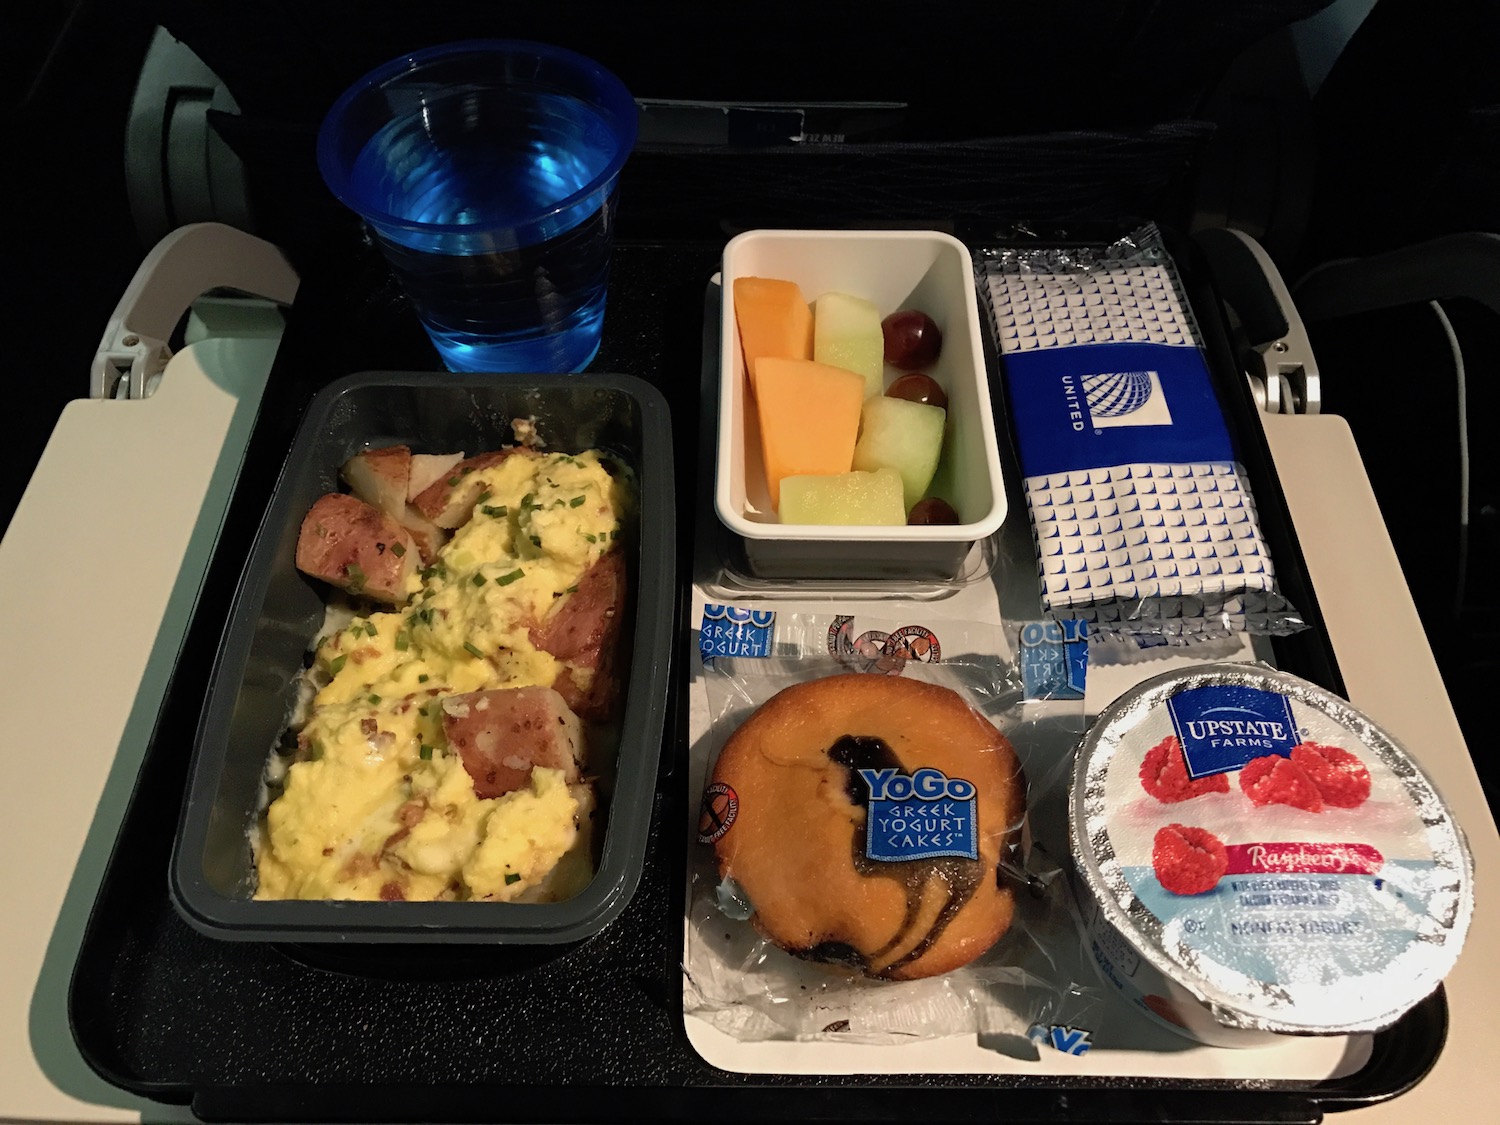 United Airlines Economy Class Meal SFO-FRA 03